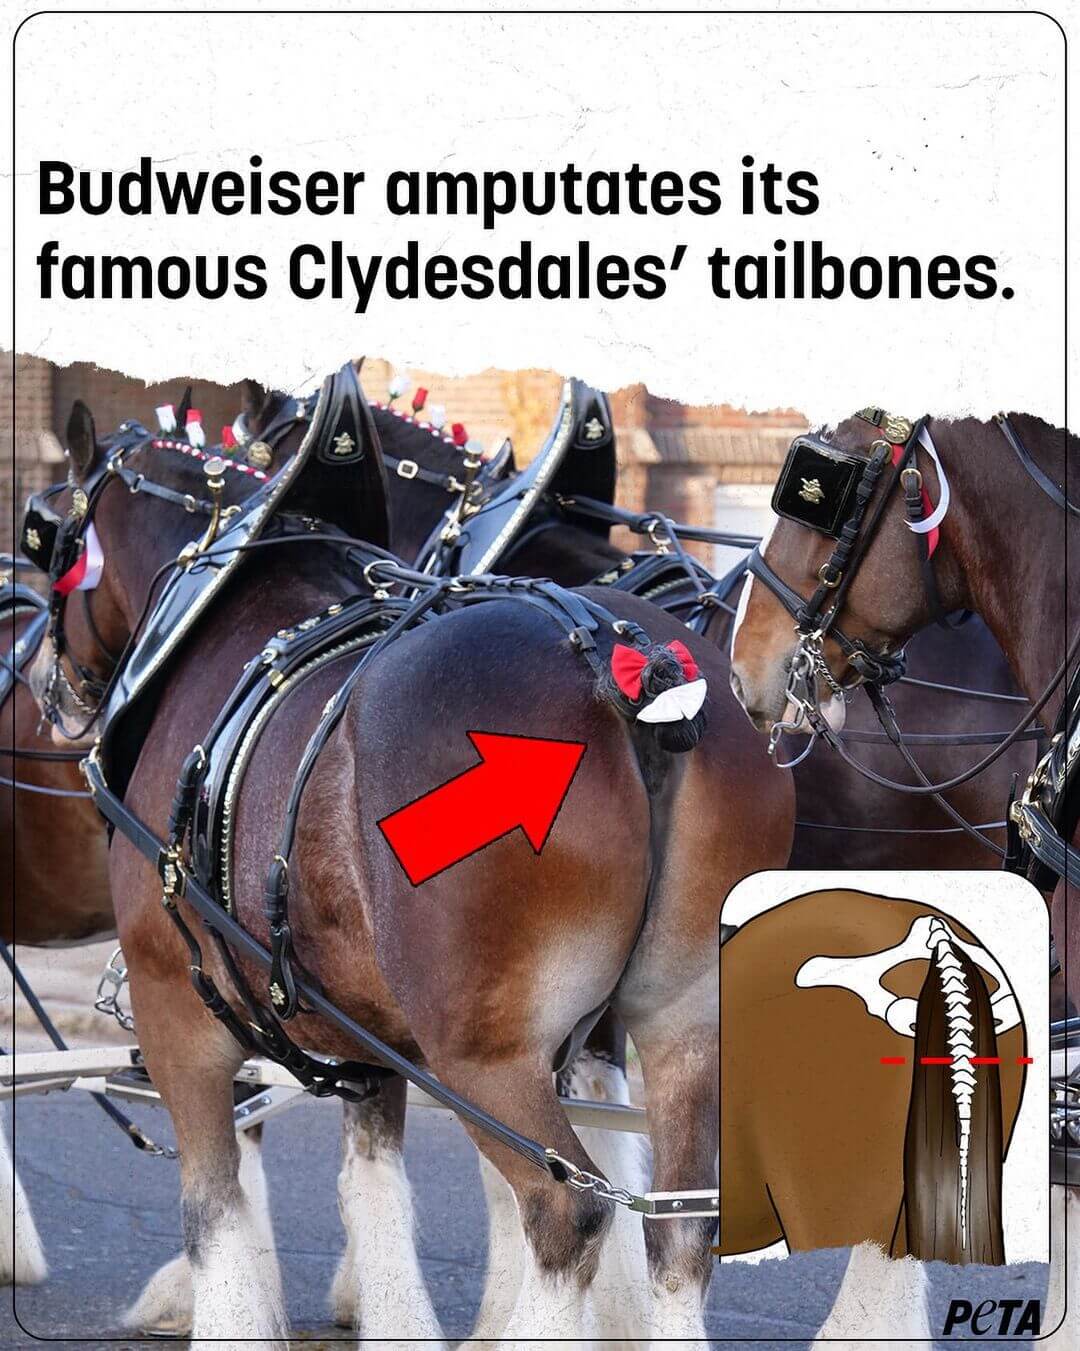 Budweiser amputates its famous Budweiser Clydesdales' tailbones.